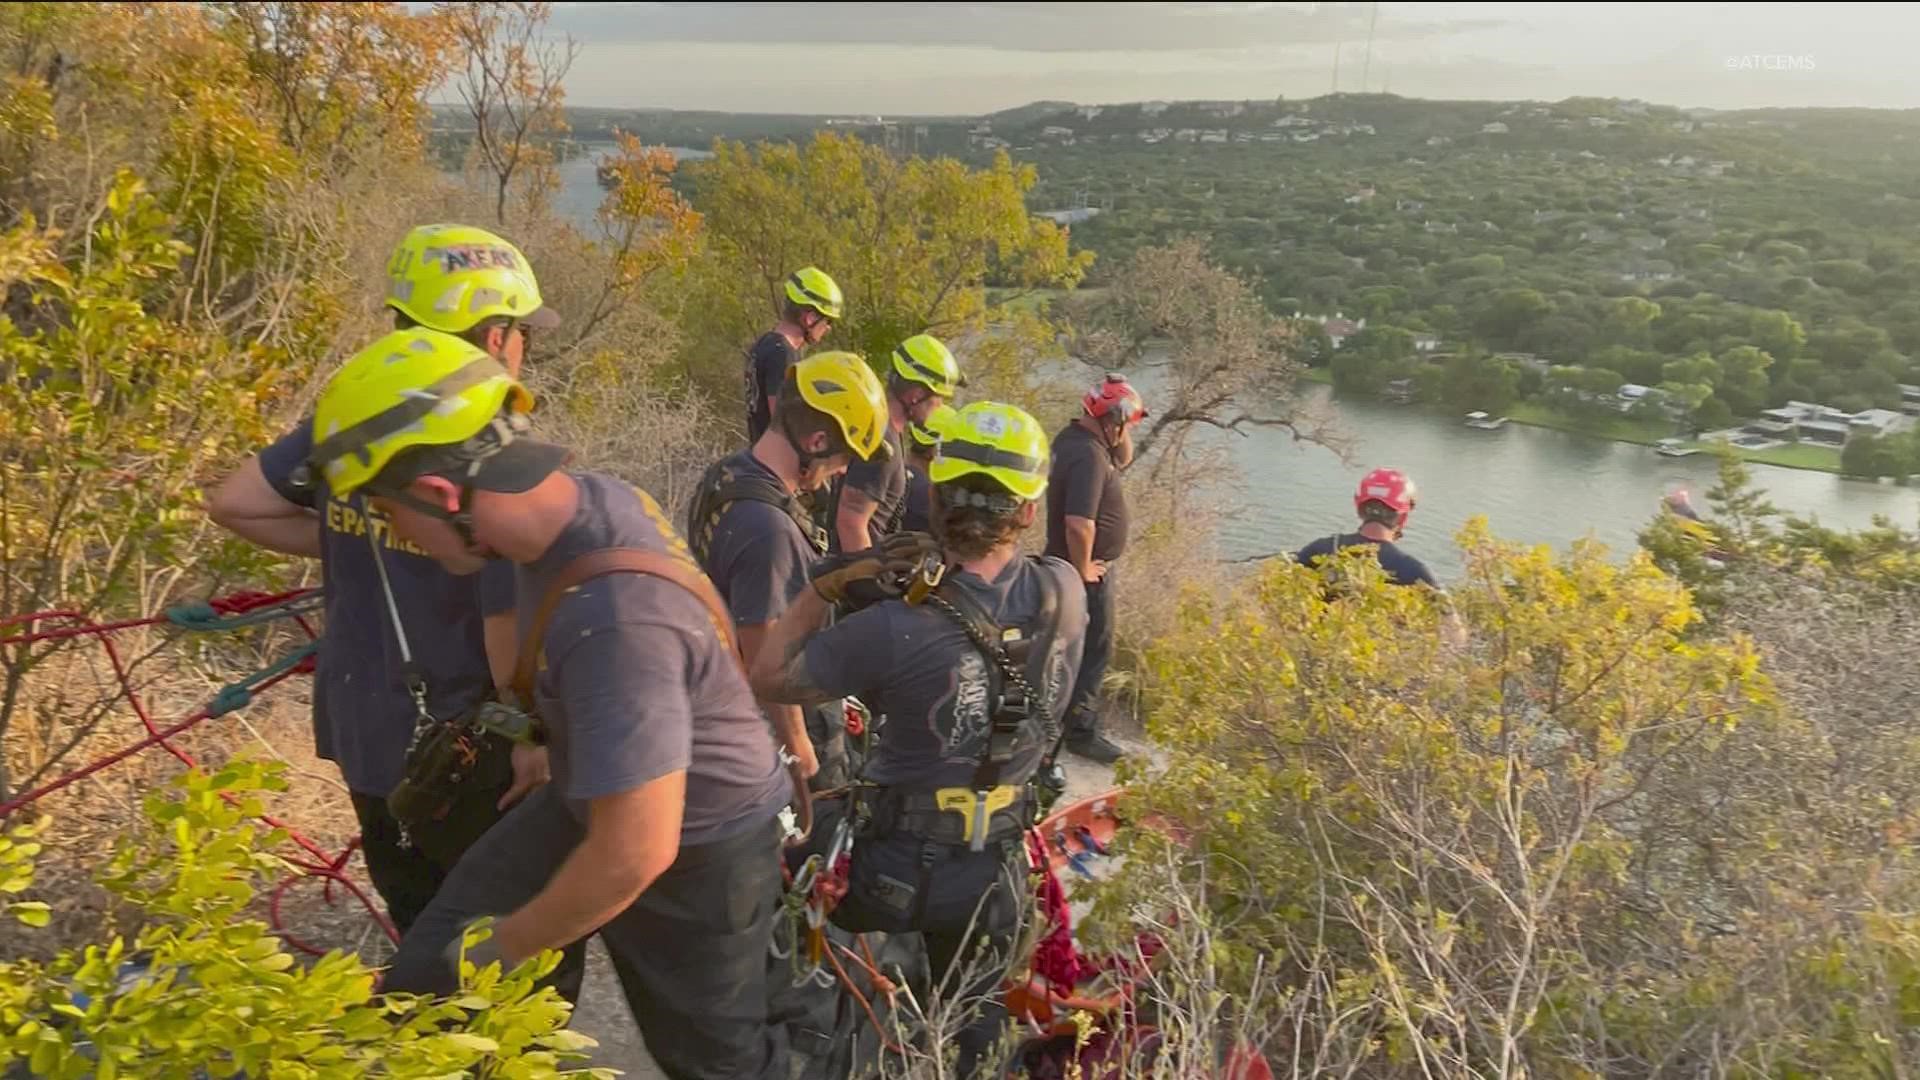 The body was found while trying to rescue someone who fell from the cliffs.